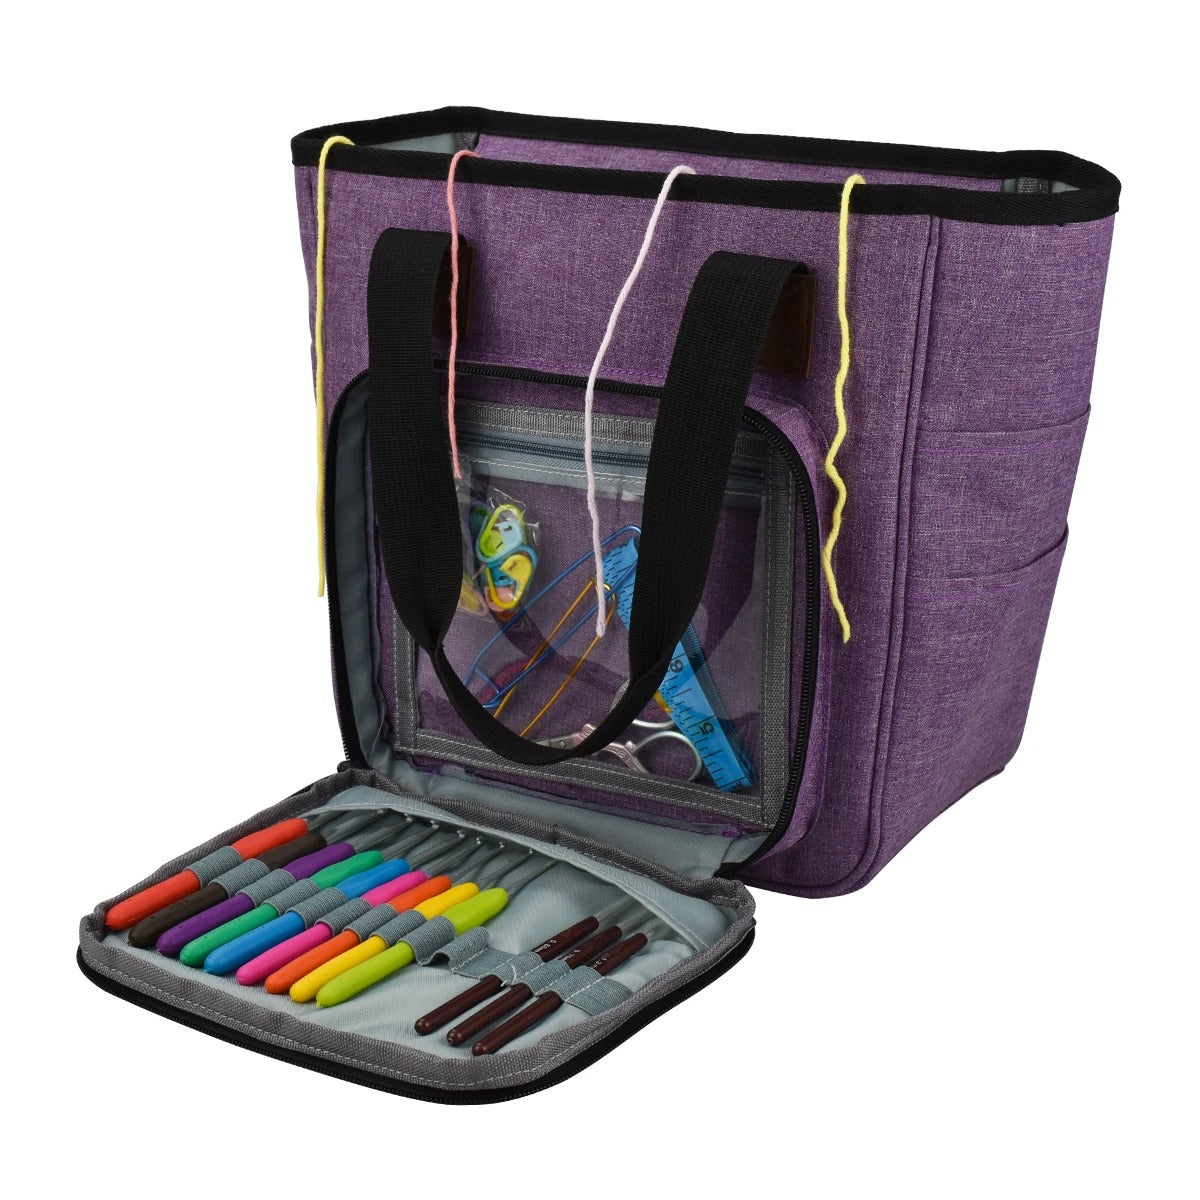 Open purple Yarn Organizer Tote with front pocket containing a notebook and visible art supplies, including craft organizer and crocheting essentials, next to a pencil case with colored markers.